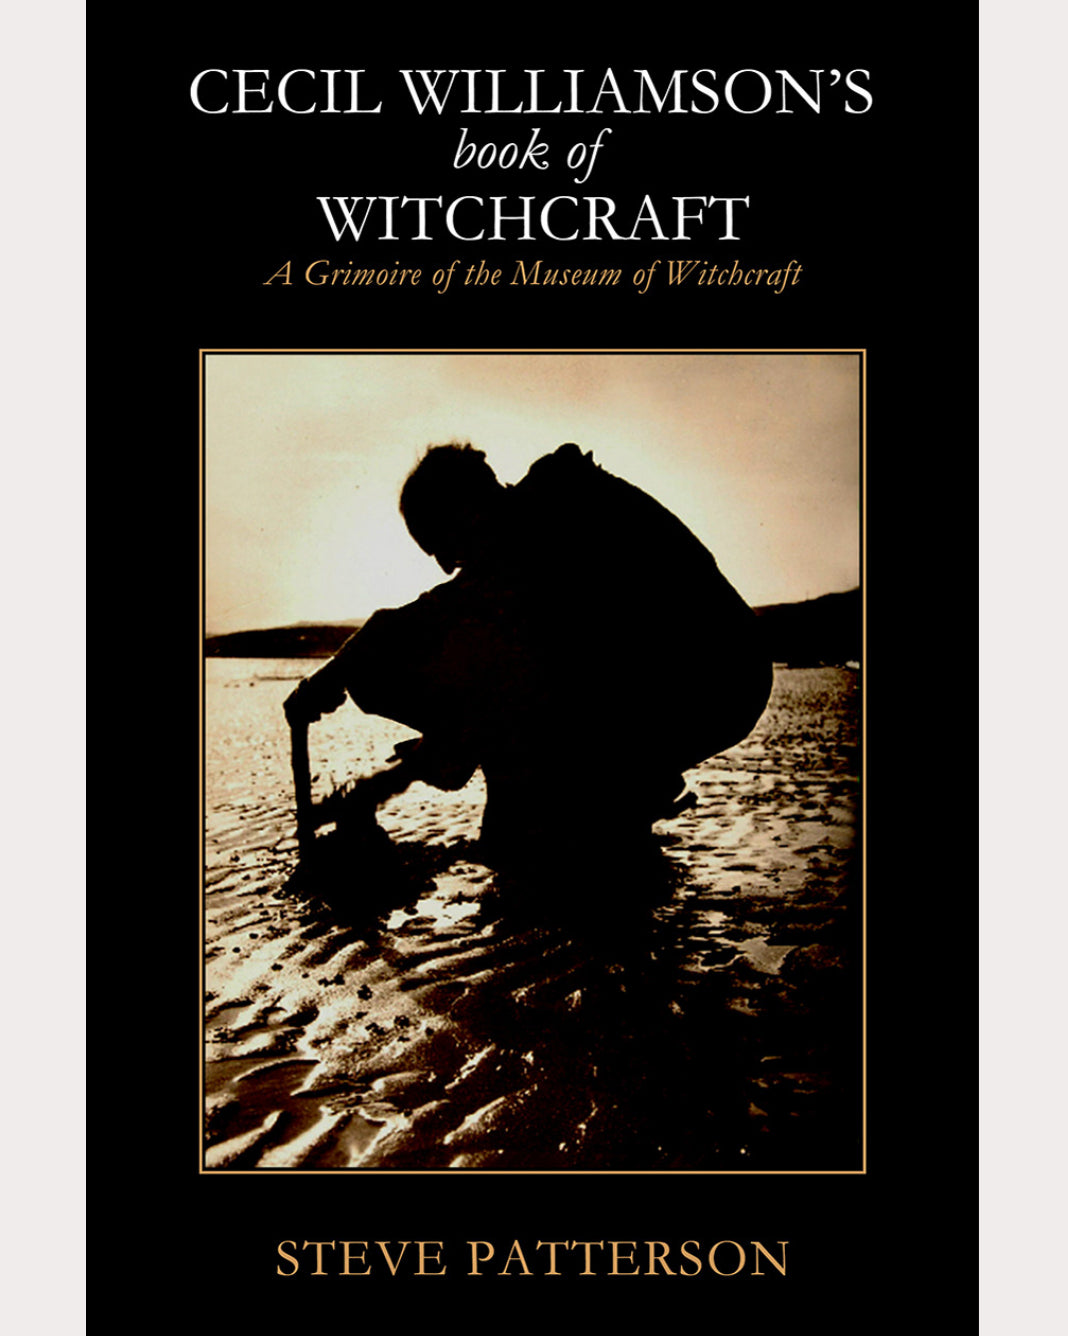 Cecil Williamson’s Book of Witchcraft | A Grimoire of The Museum of Witchcraft